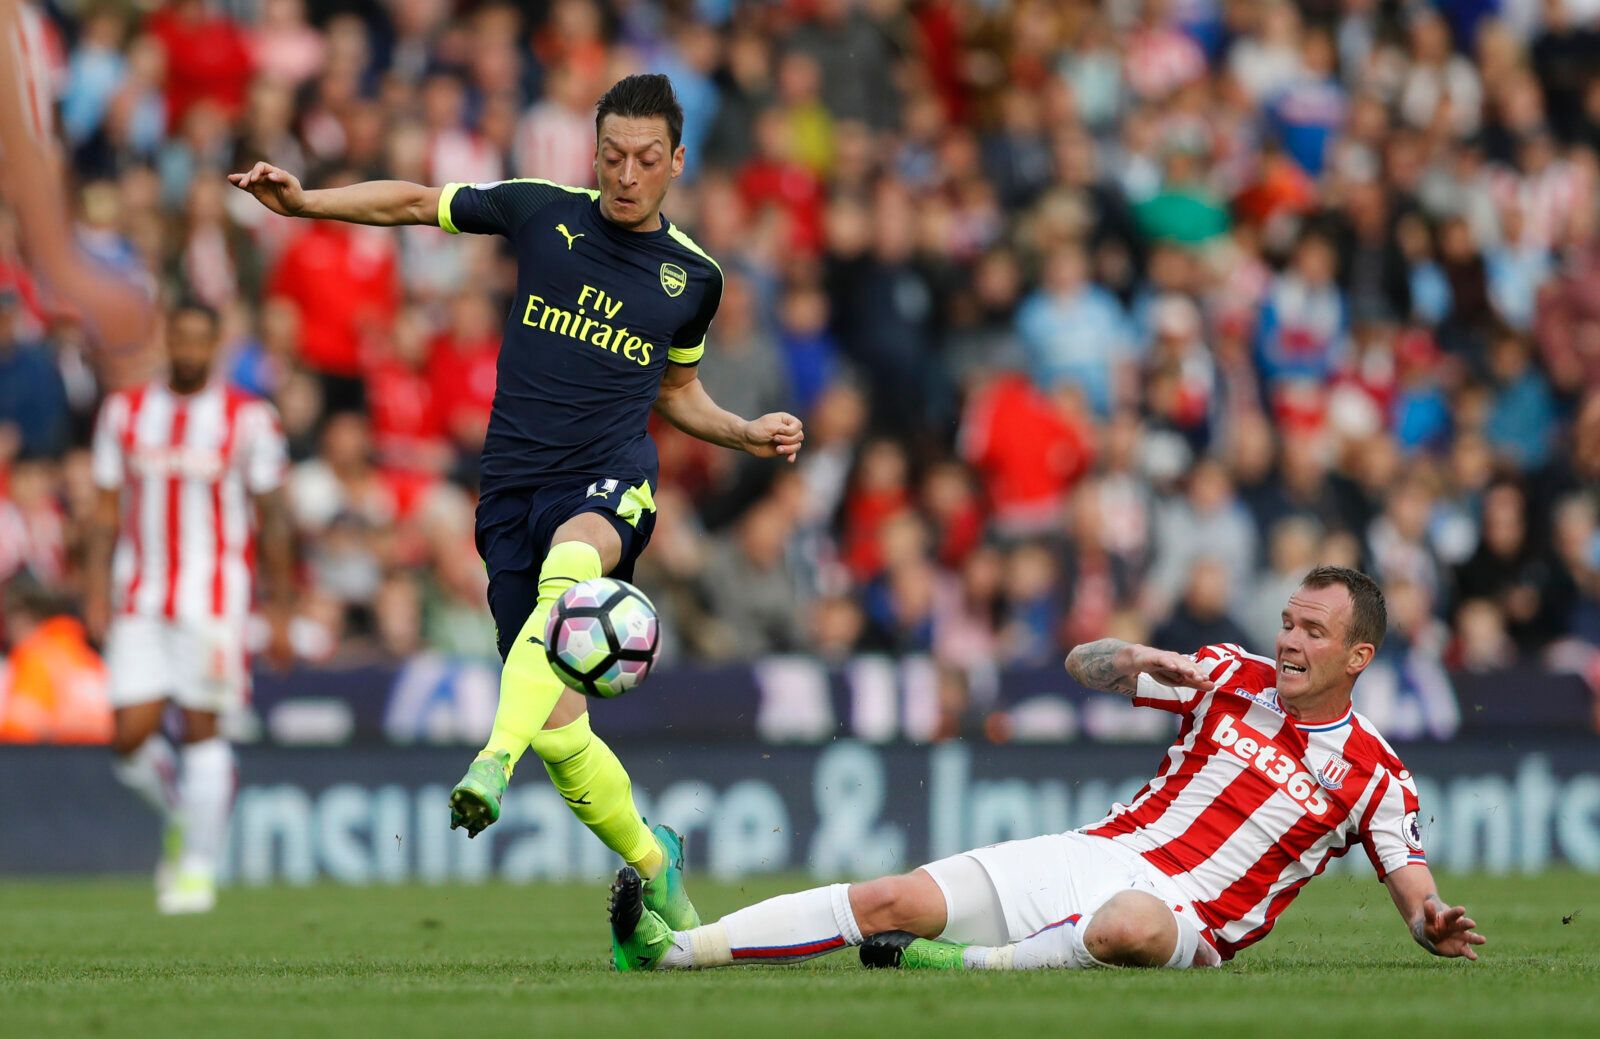 Britain Football Soccer - Stoke City v Arsenal - Premier League - bet365 Stadium - 13/5/17 Arsenal's Mesut Ozil in action with Stoke City's Glenn Whelan Action Images via Reuters / Carl Recine Livepic EDITORIAL USE ONLY. No use with unauthorized audio, video, data, fixture lists, club/league logos or 